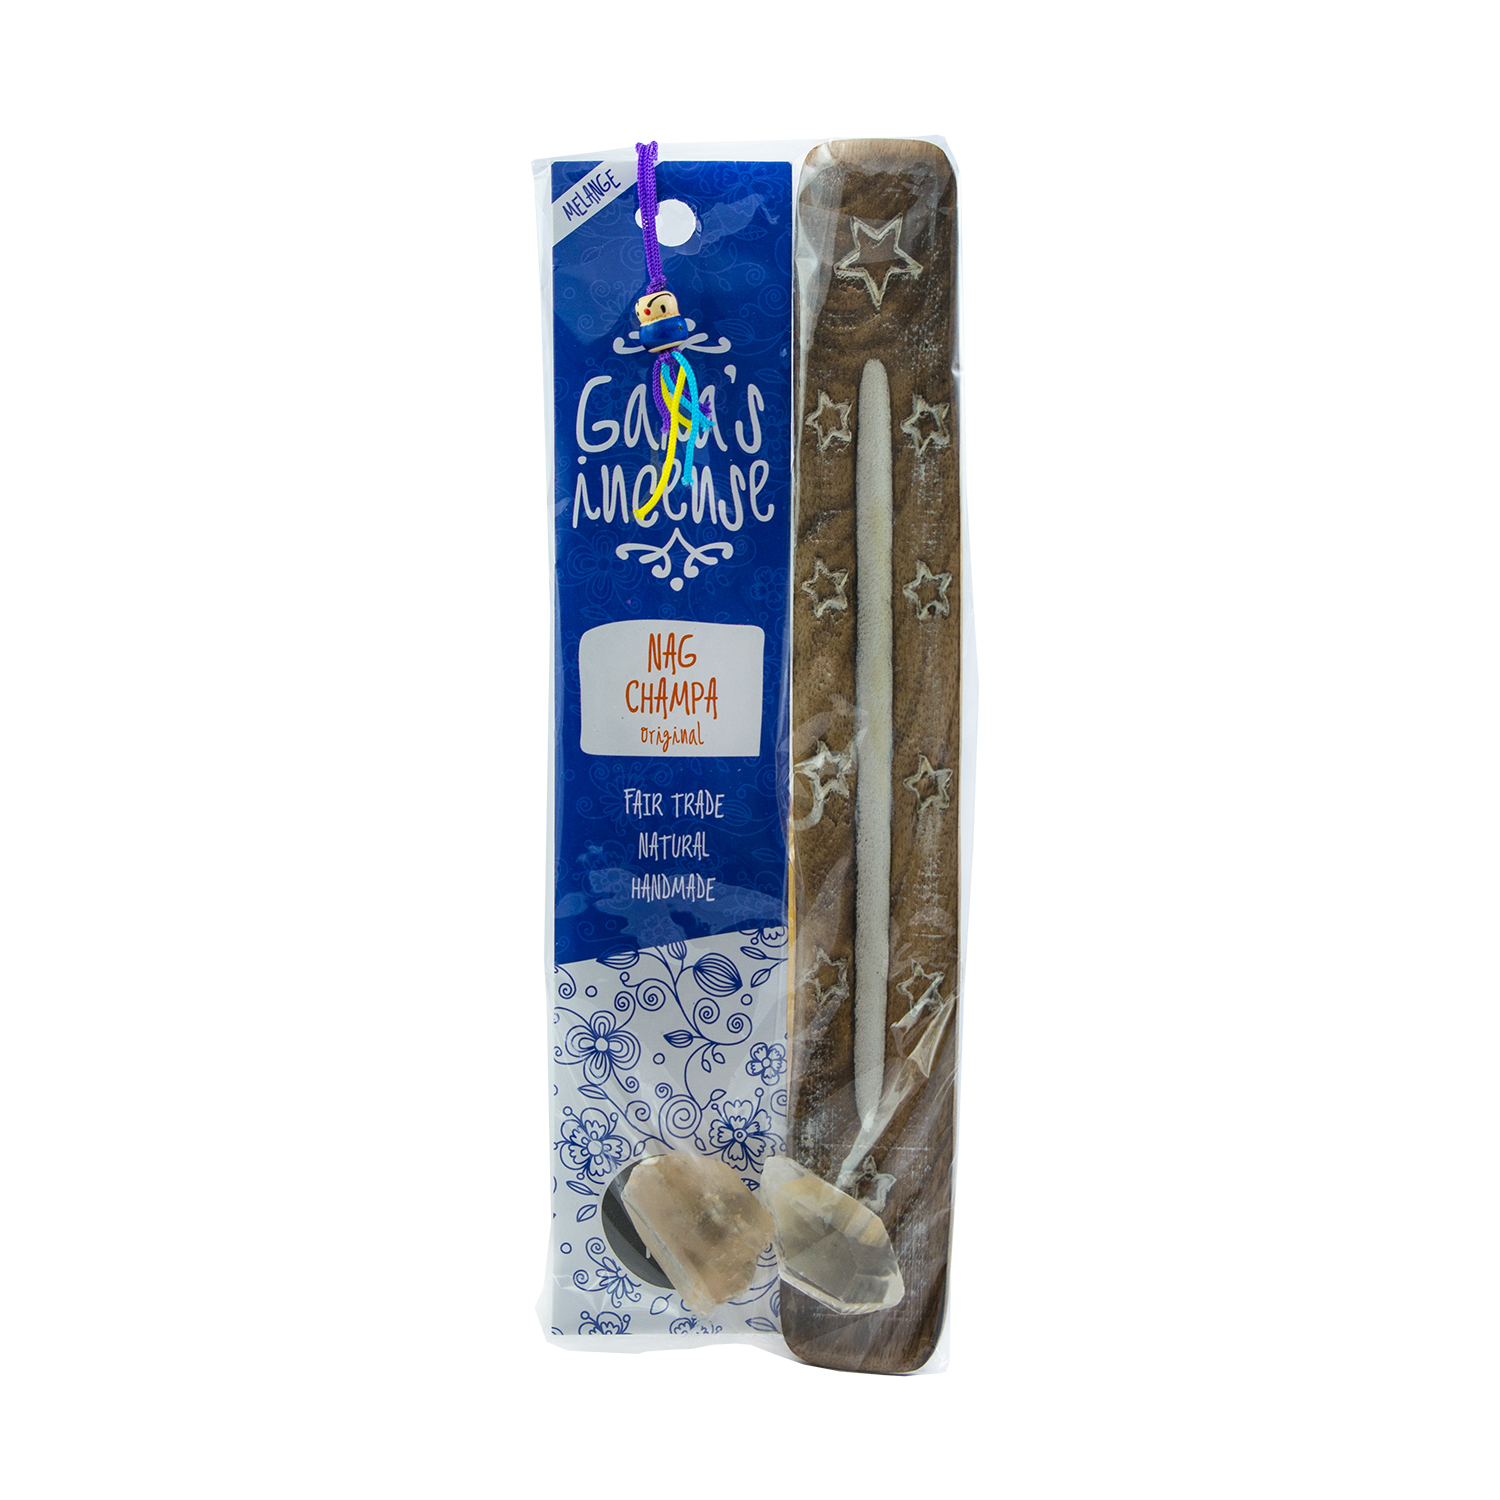 PACK OF LUCK NAG CHAMPA